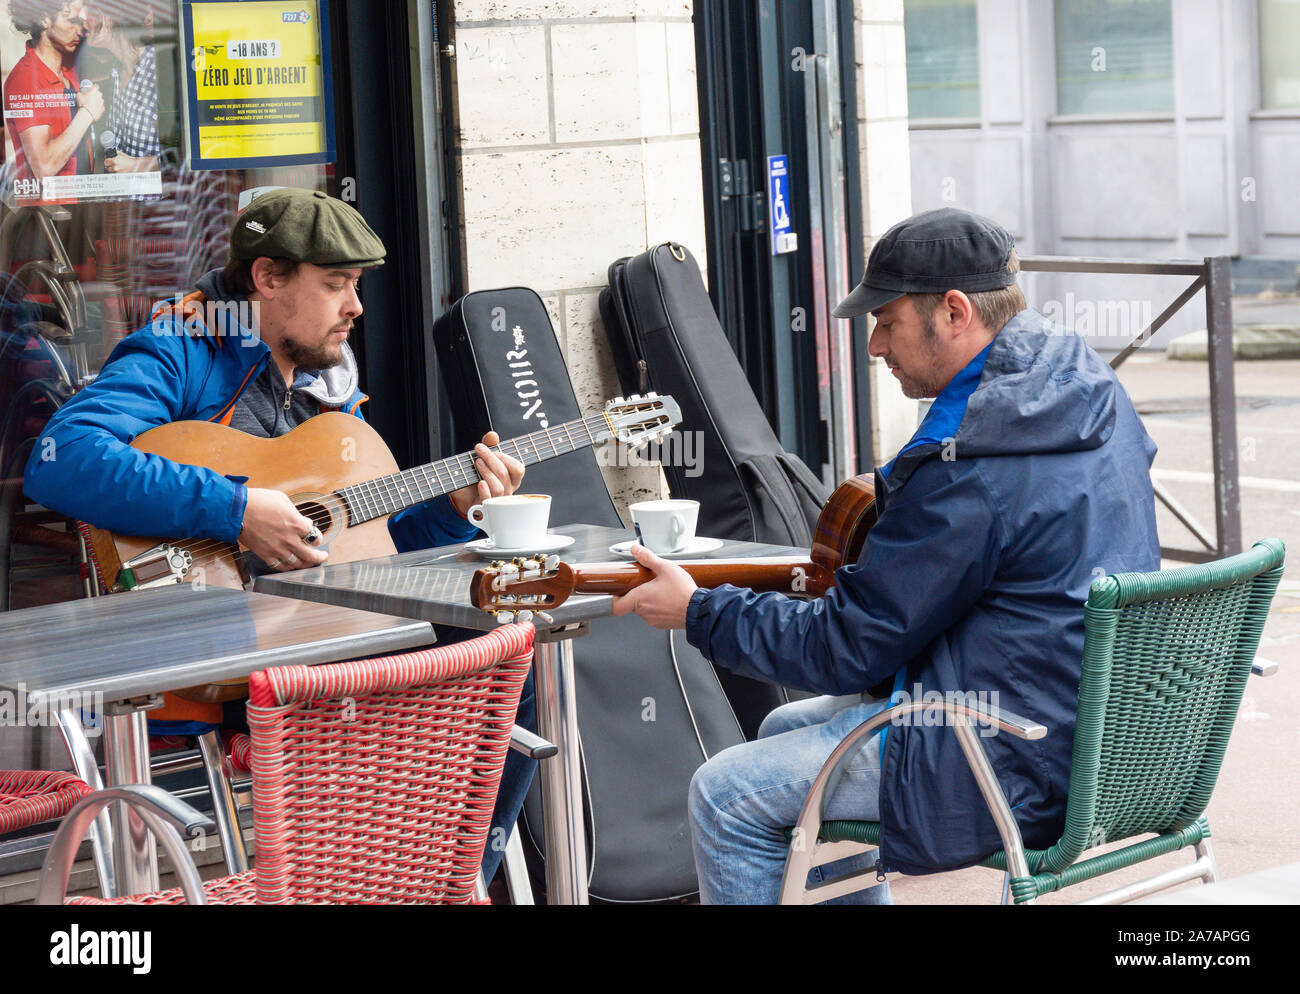 Young men playing guitars in outdoor cafe, Place Barthélémy, Rouen, Normandy, France Stock Photo